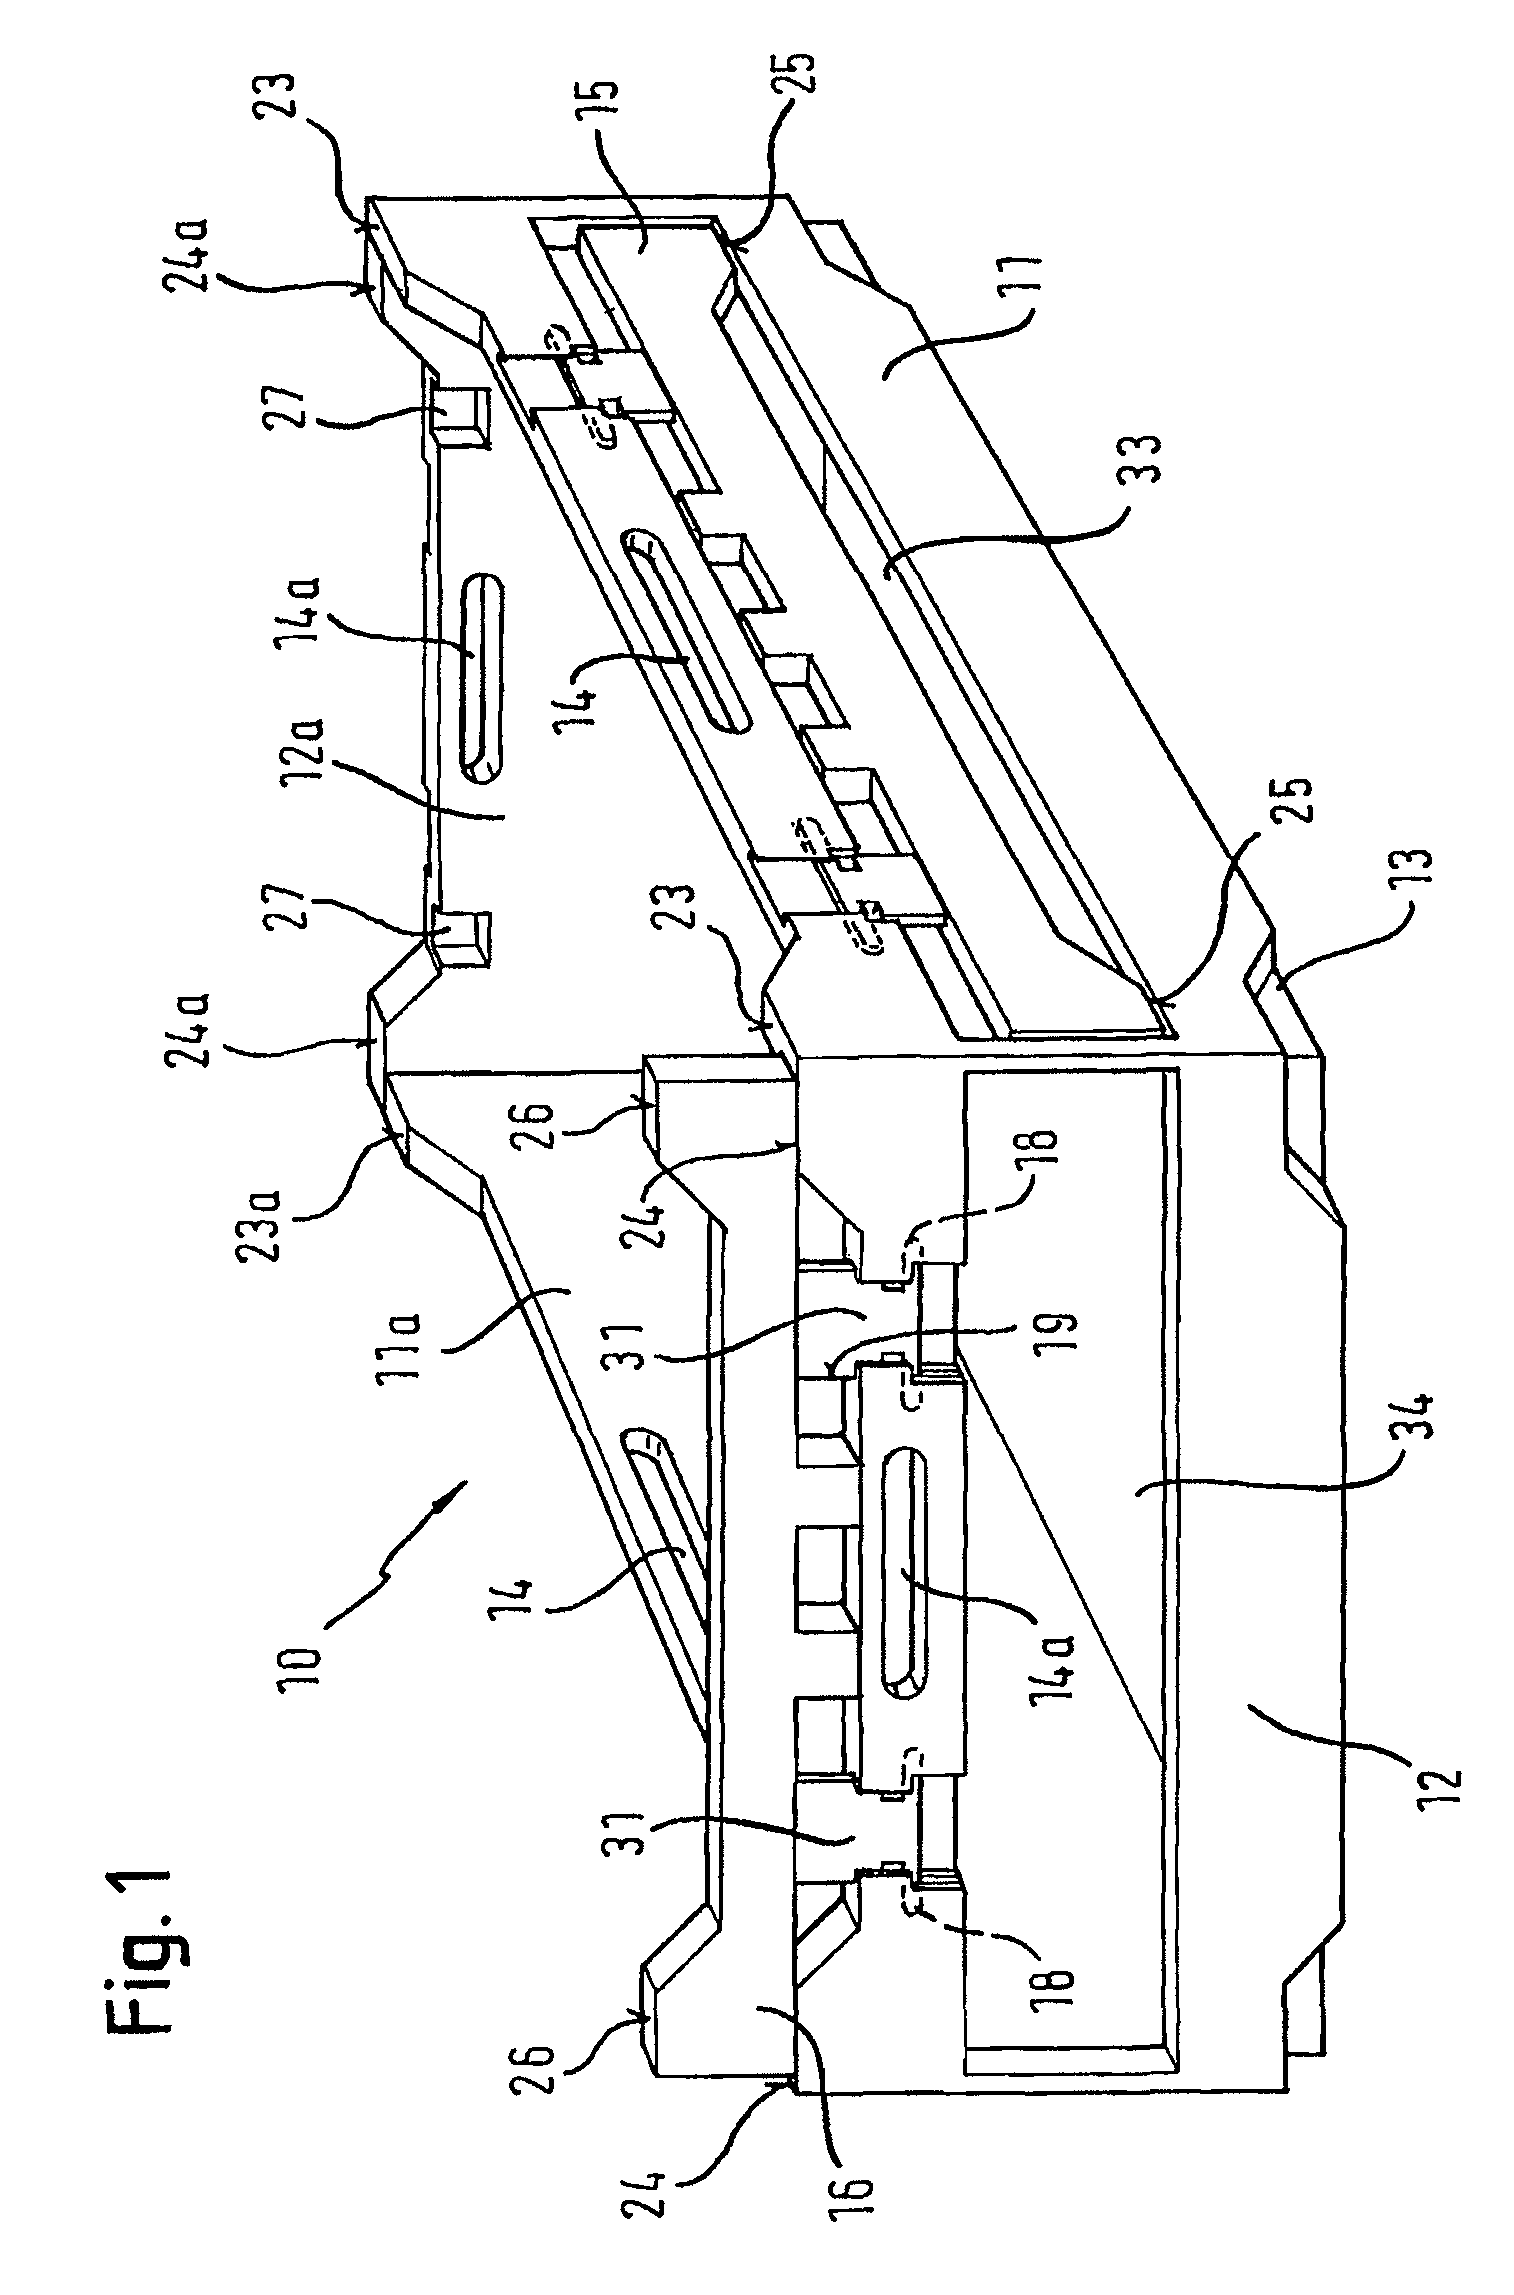 Transport container system with sidewall attachment elements for increasing the transport capacity